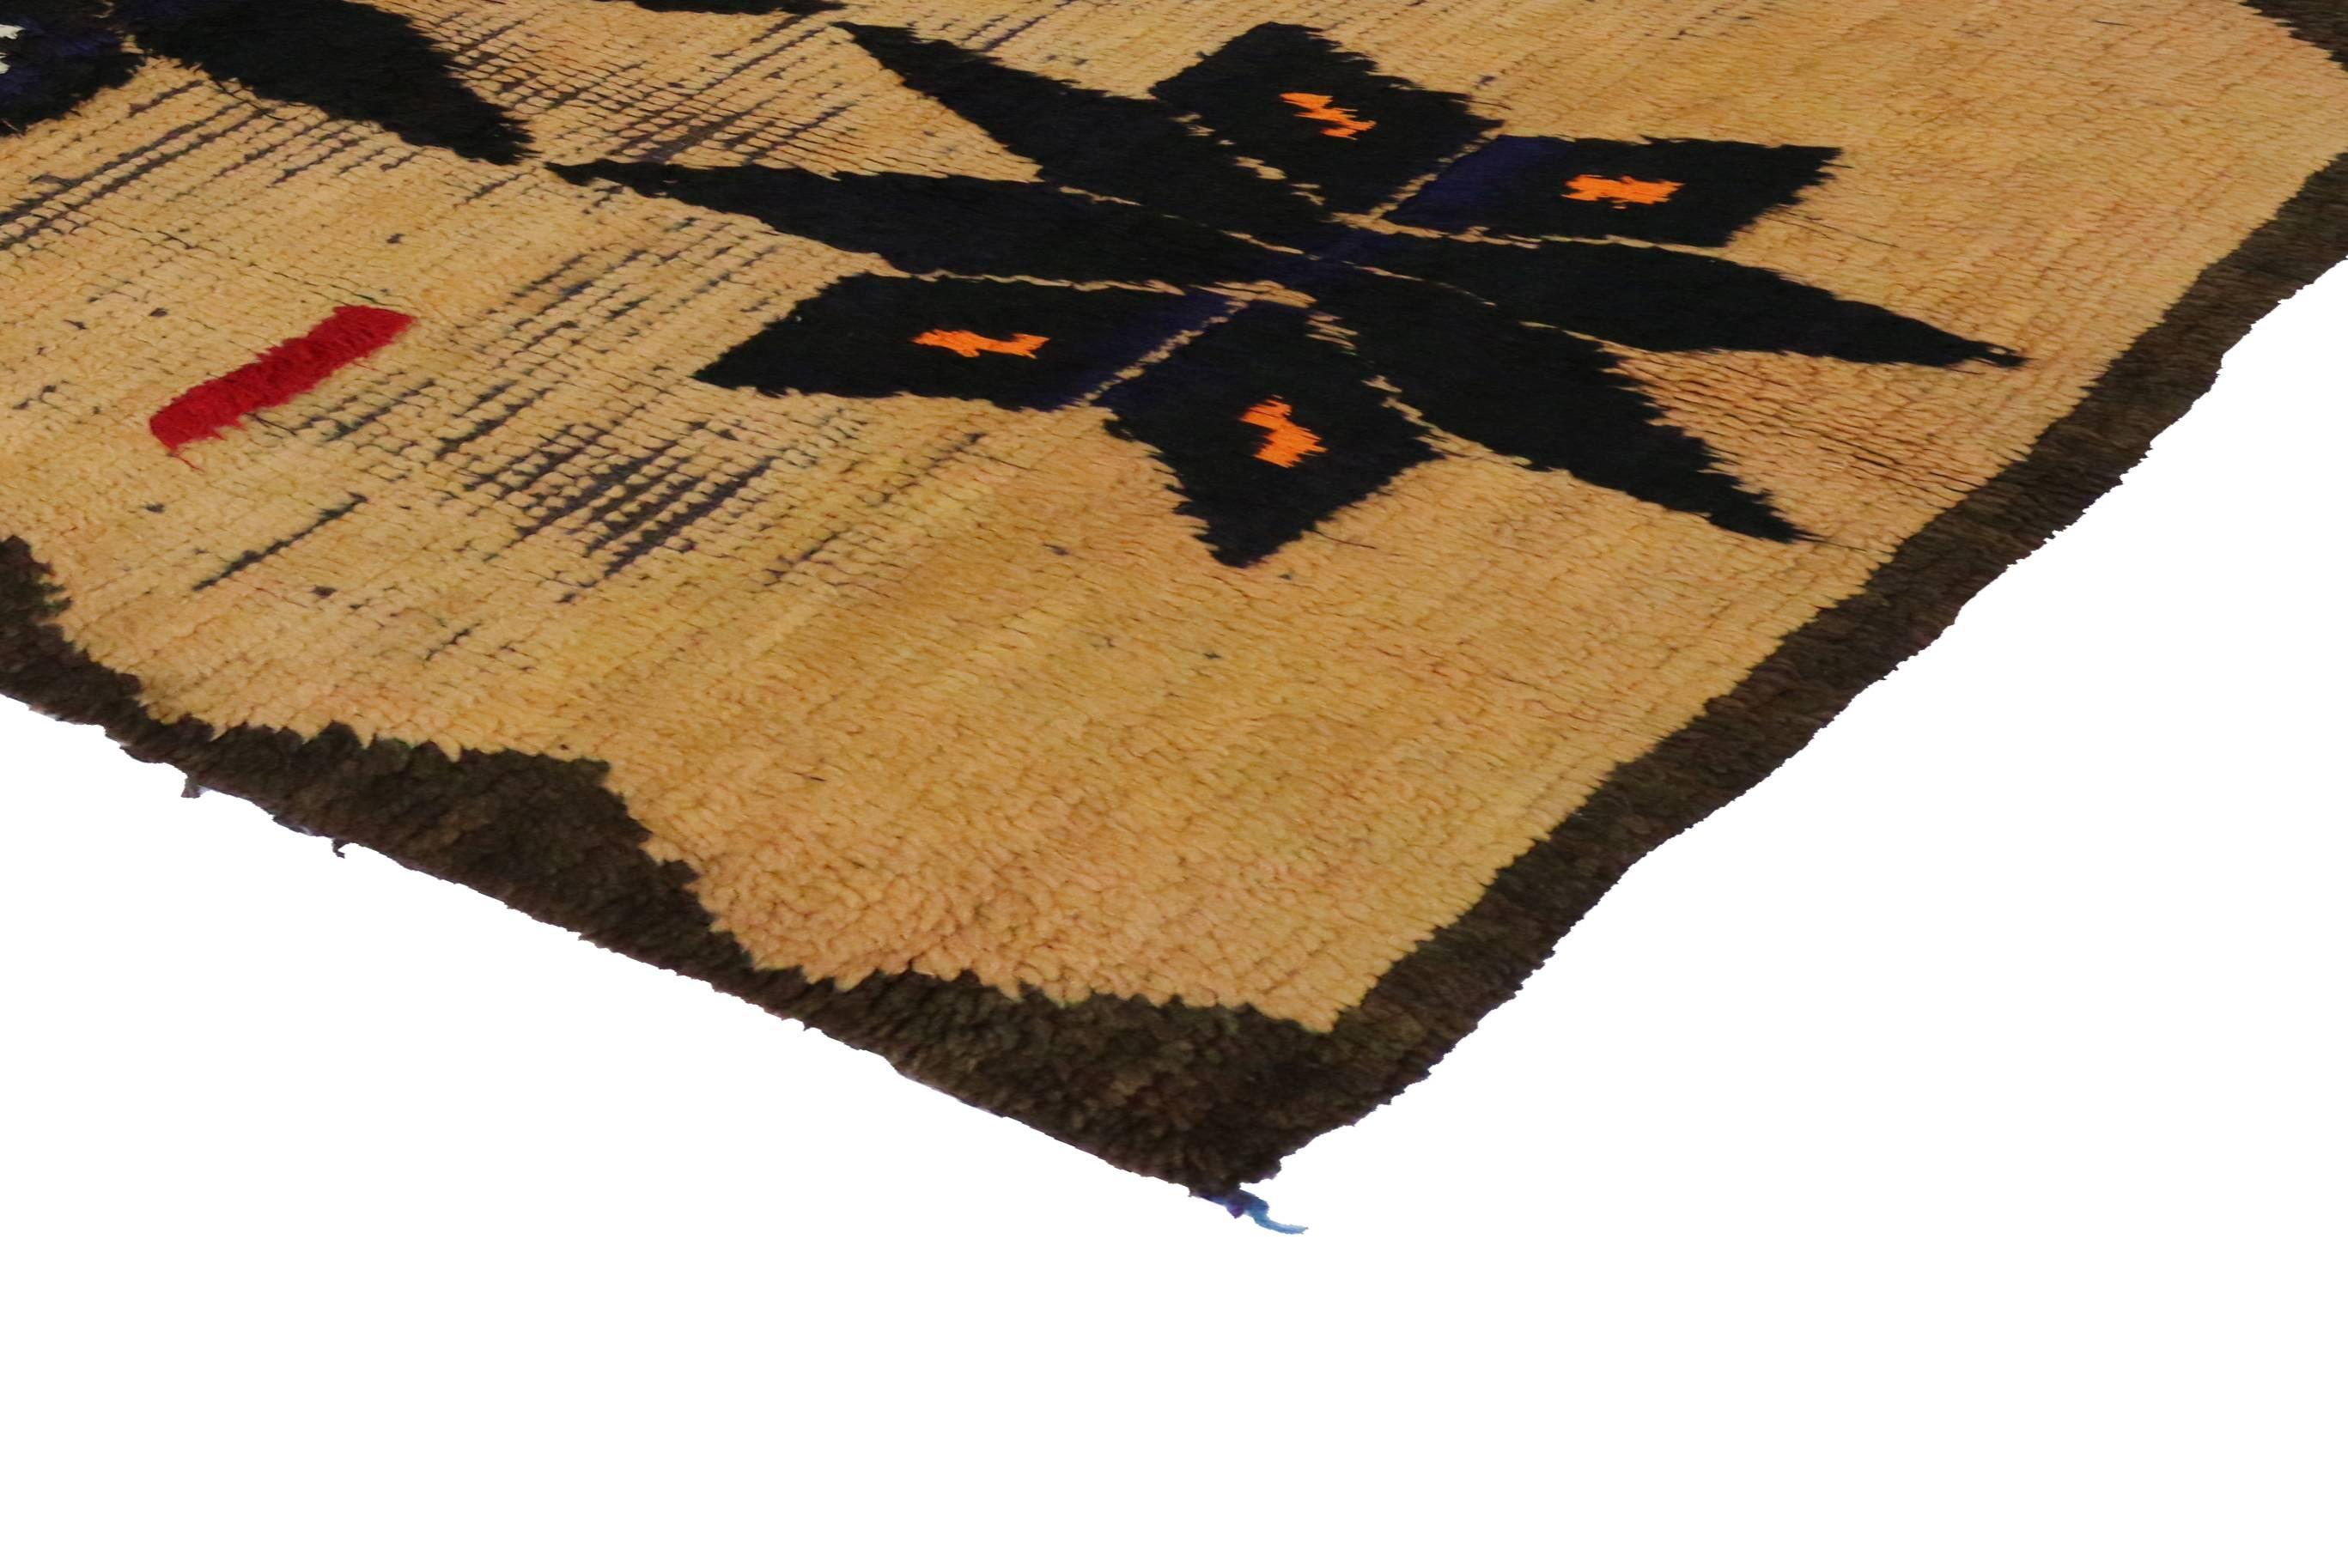 20048 Vintage Berber Moroccan Rug with Modern Tribal Style. This vintage Berber Moroccan rug with modern tribal style features four eight-point black motifs in an abrashed golden field and colorful purple and aqua fringe. With its tribal style and